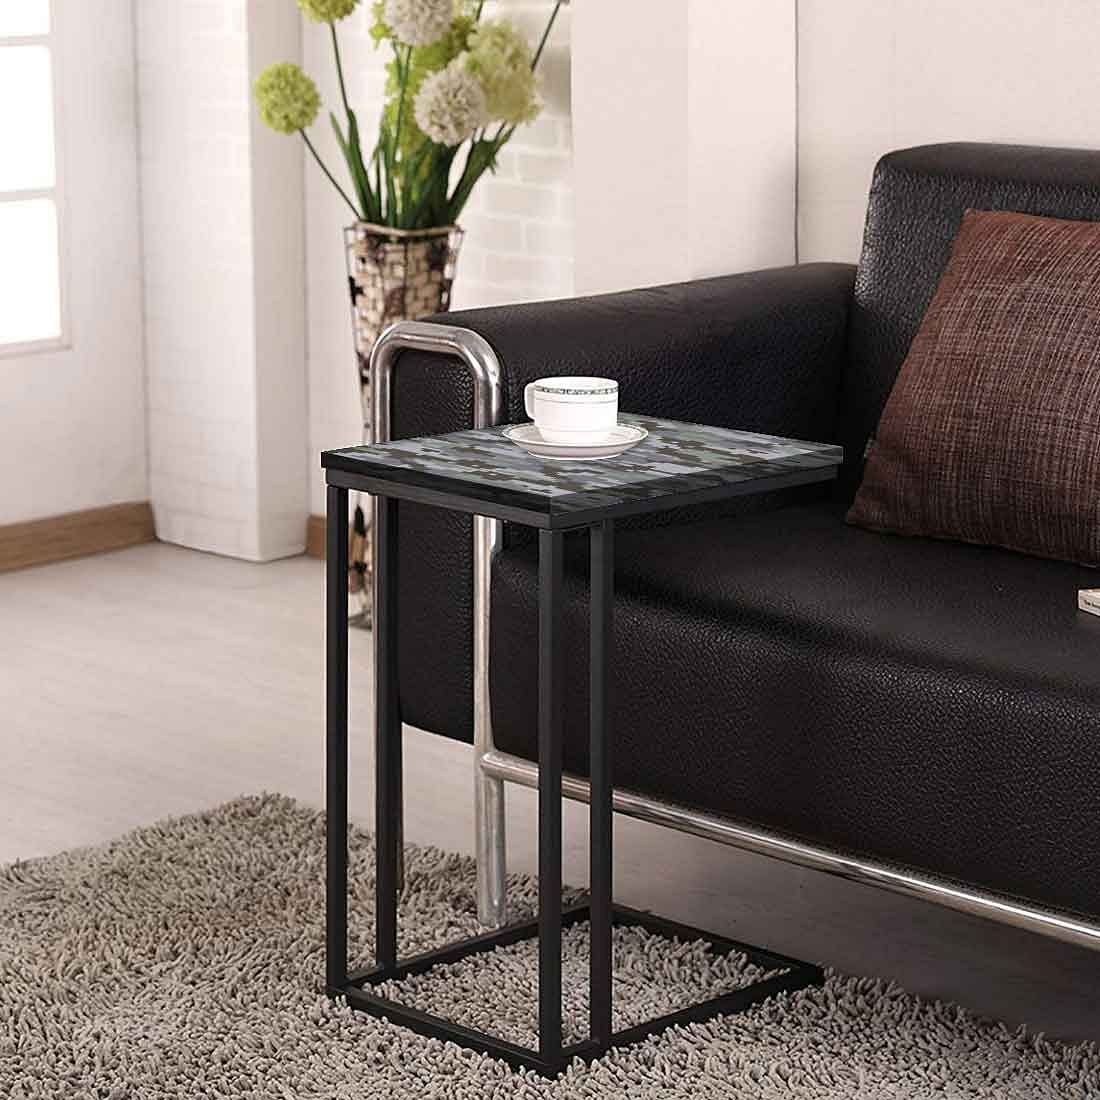 Metal Grey C Table For Sofa - Gray Camouflage Nutcase